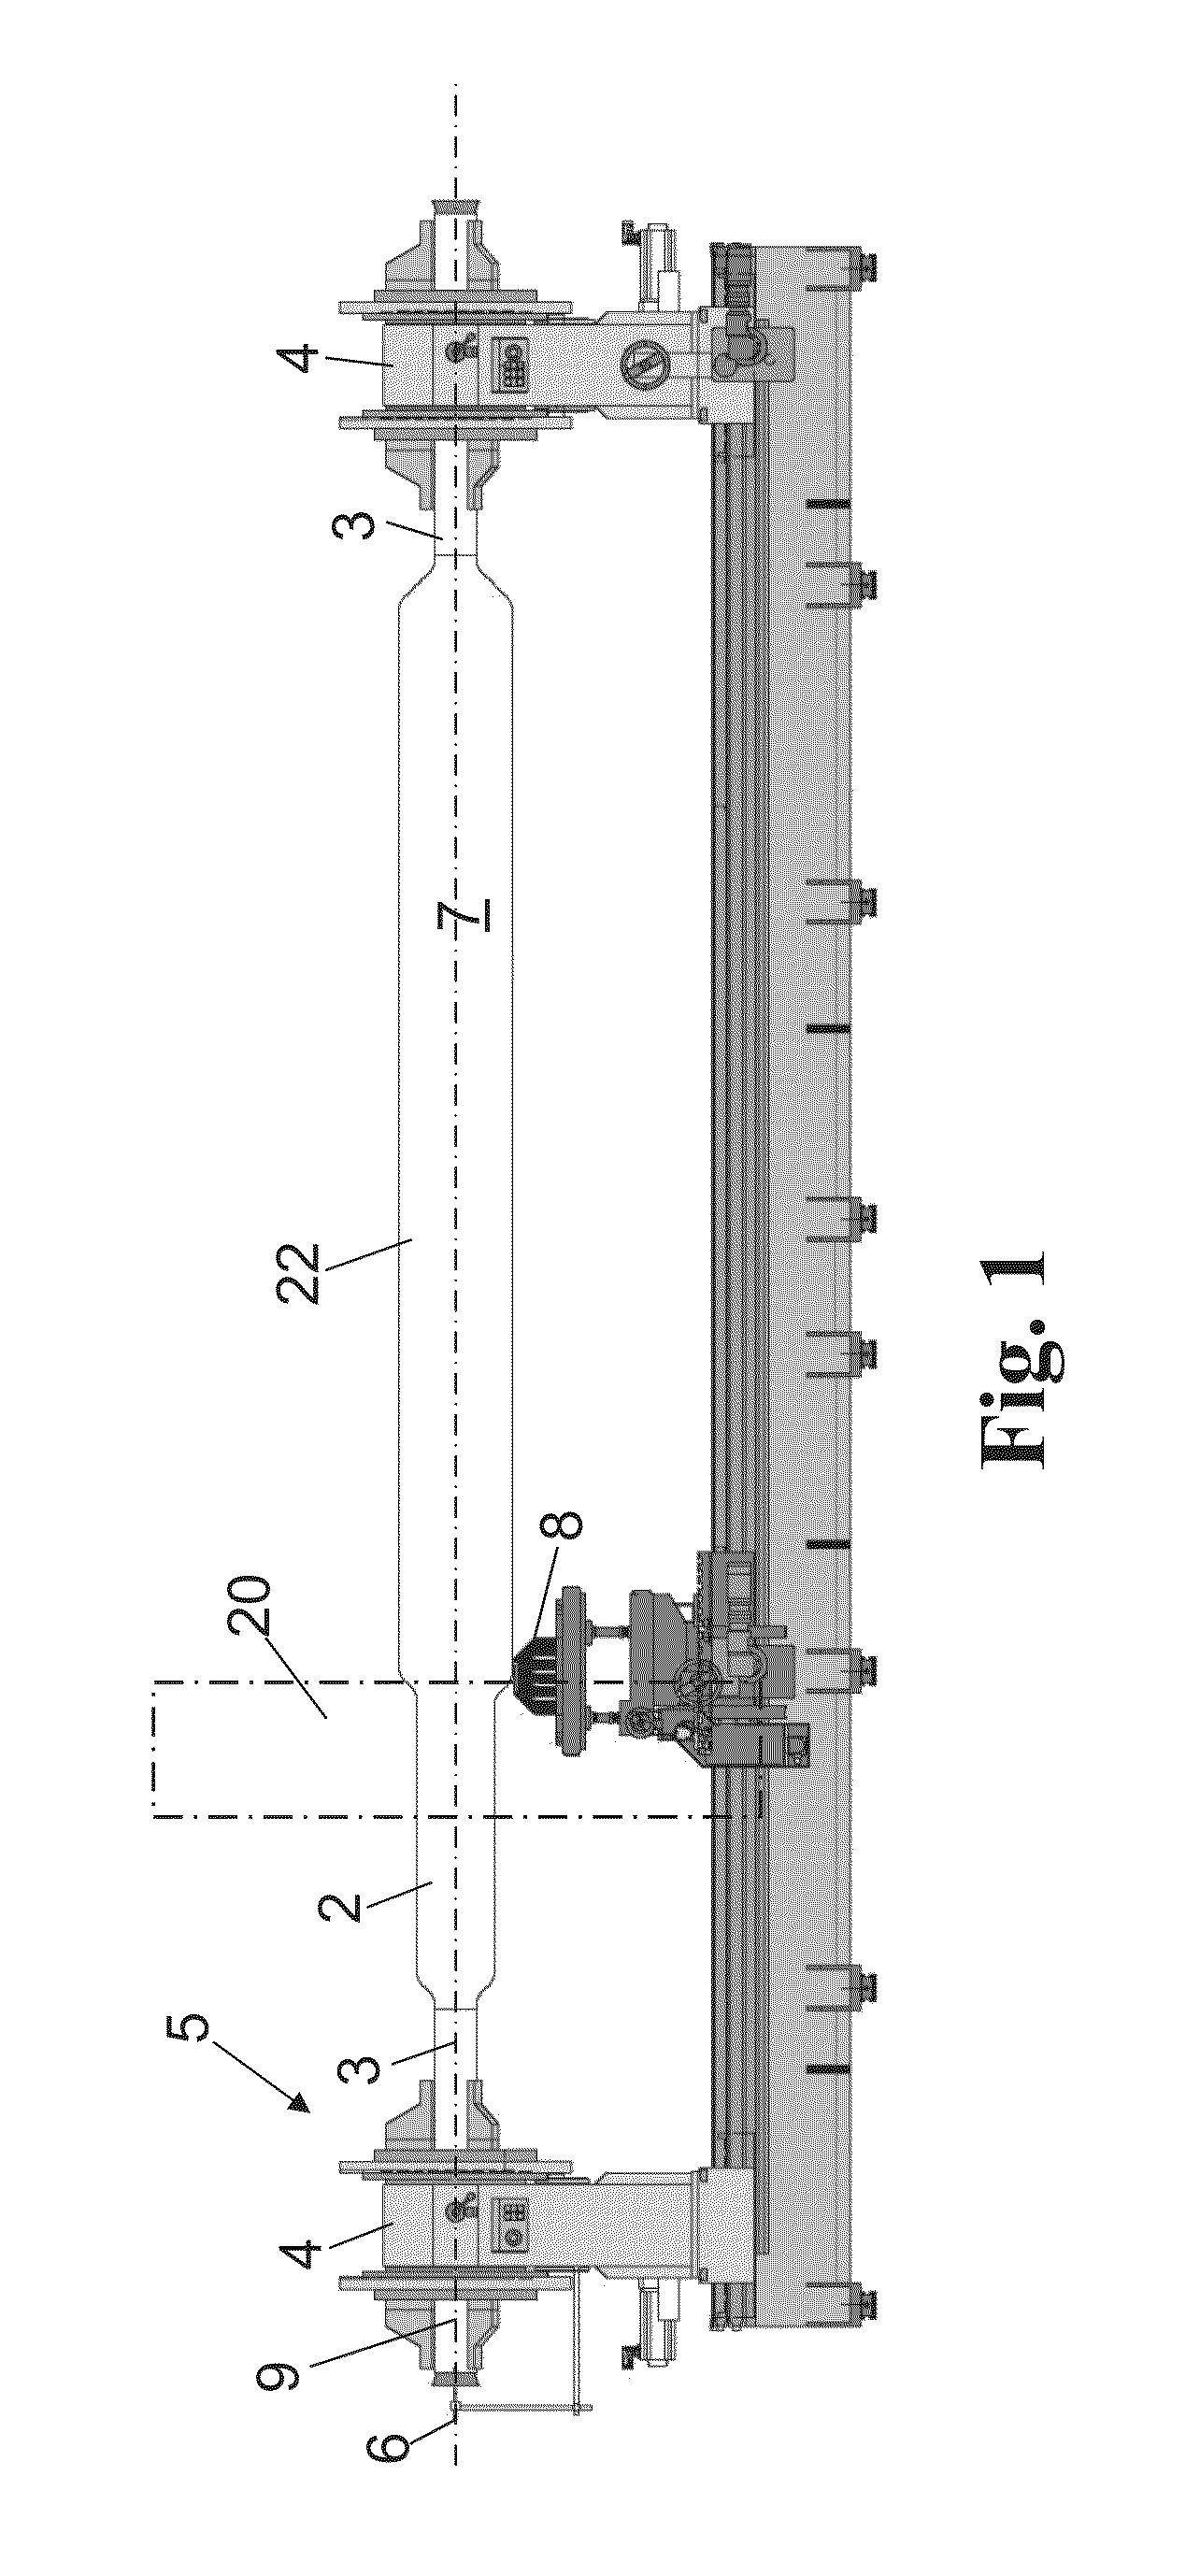 Method for producing a tube of glass